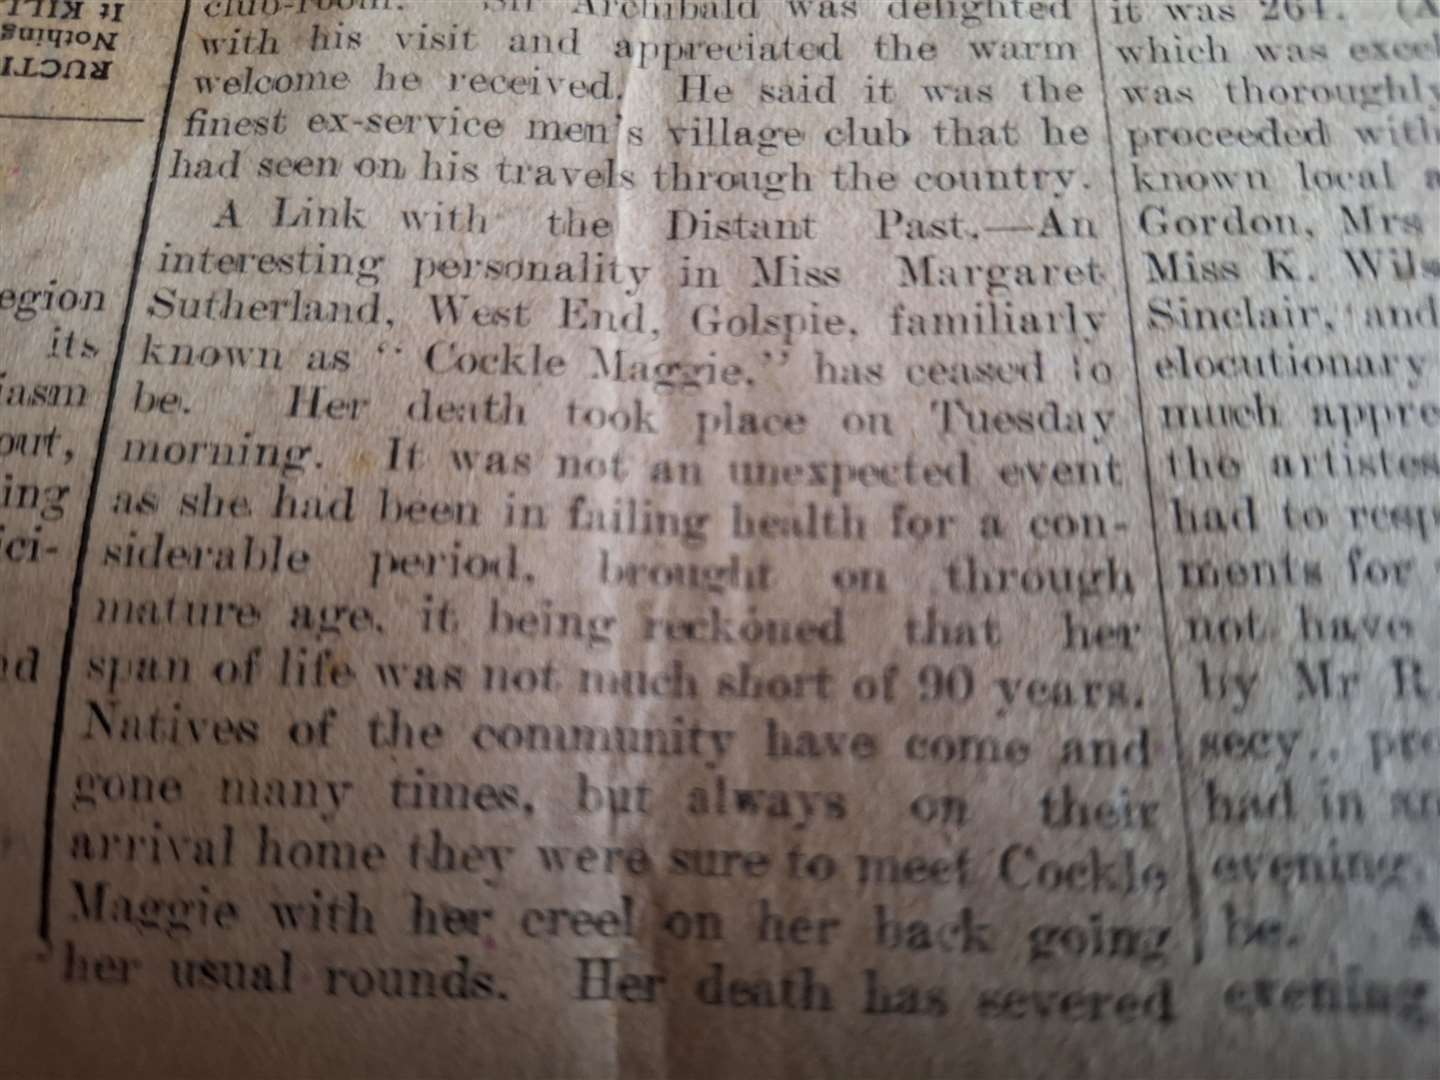 The death of Miss Margaret Sutherland, known as "Cockle Maggie" was recorded 100 years ago in the Northern Times of October 25, 1923.